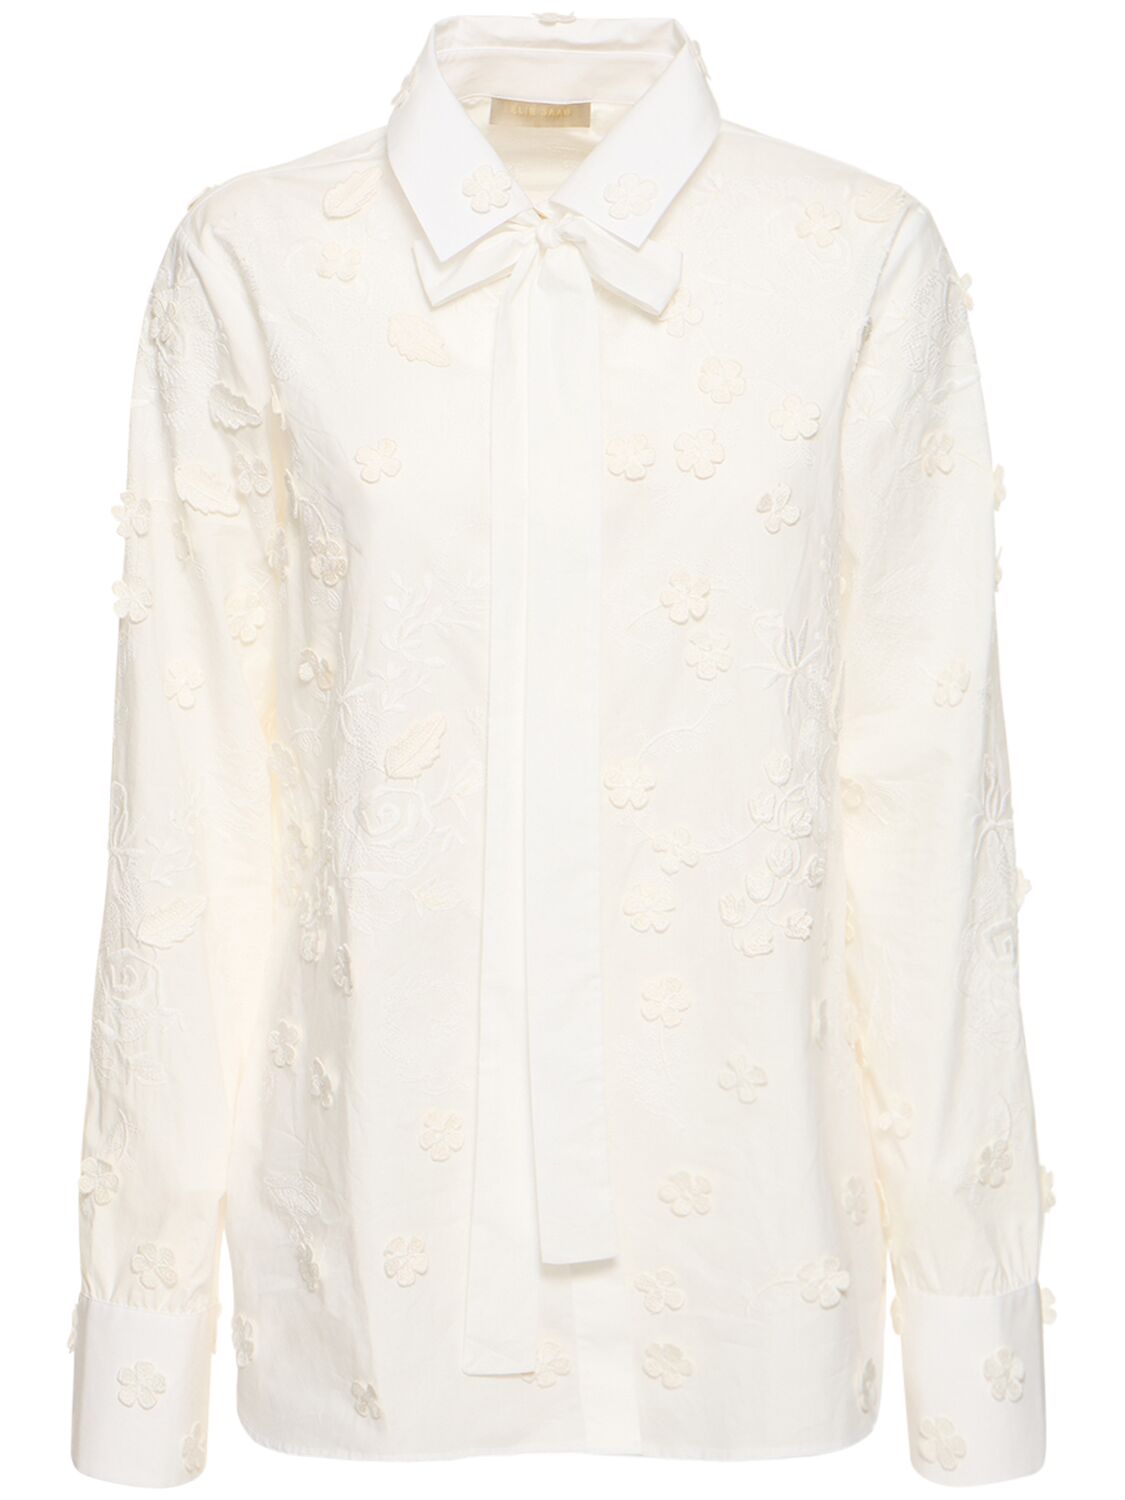 Image of Embroidered Poplin Shirt W/ Flowers